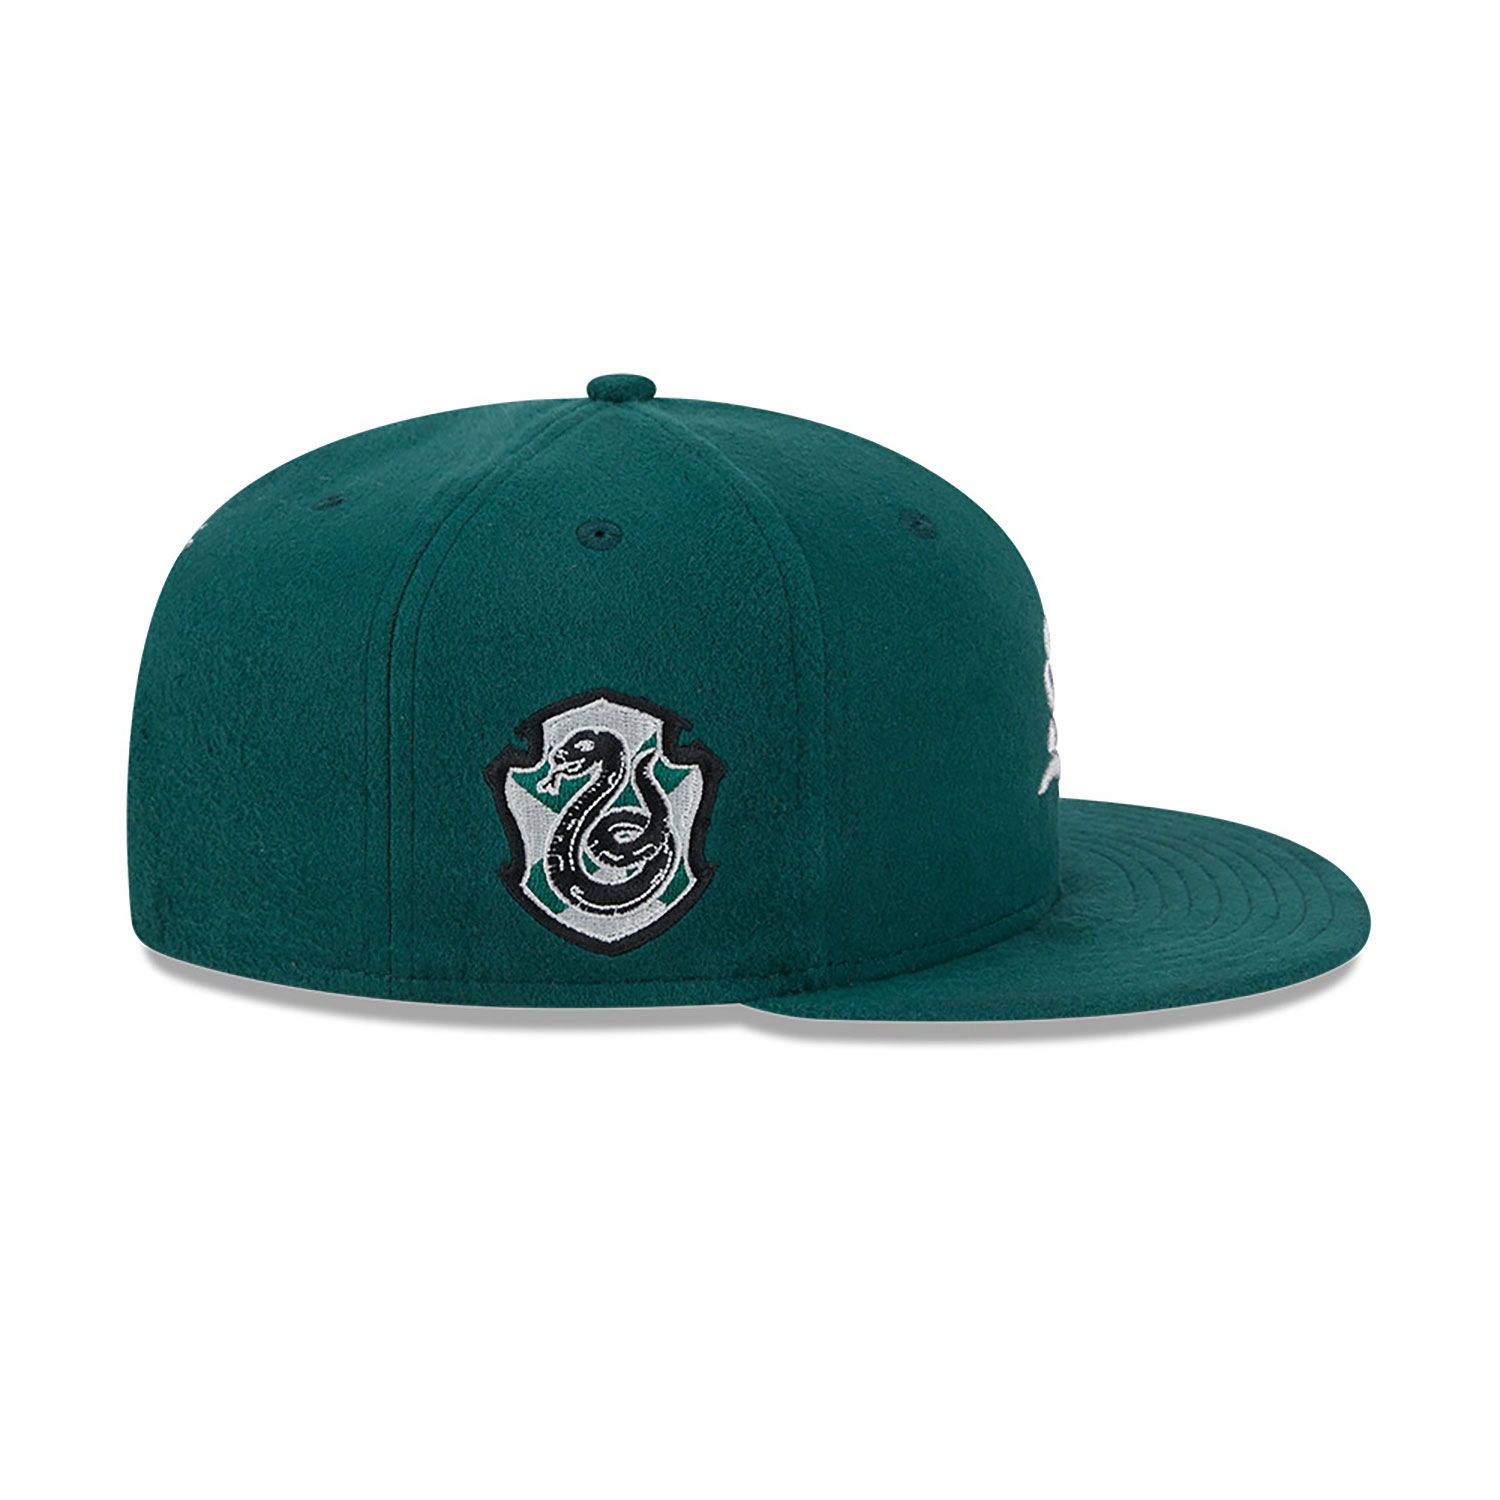 Harry Potter and the Deathly Hallows Part 2 Slytherin Dark Green 9FIFTY Snapback Cap